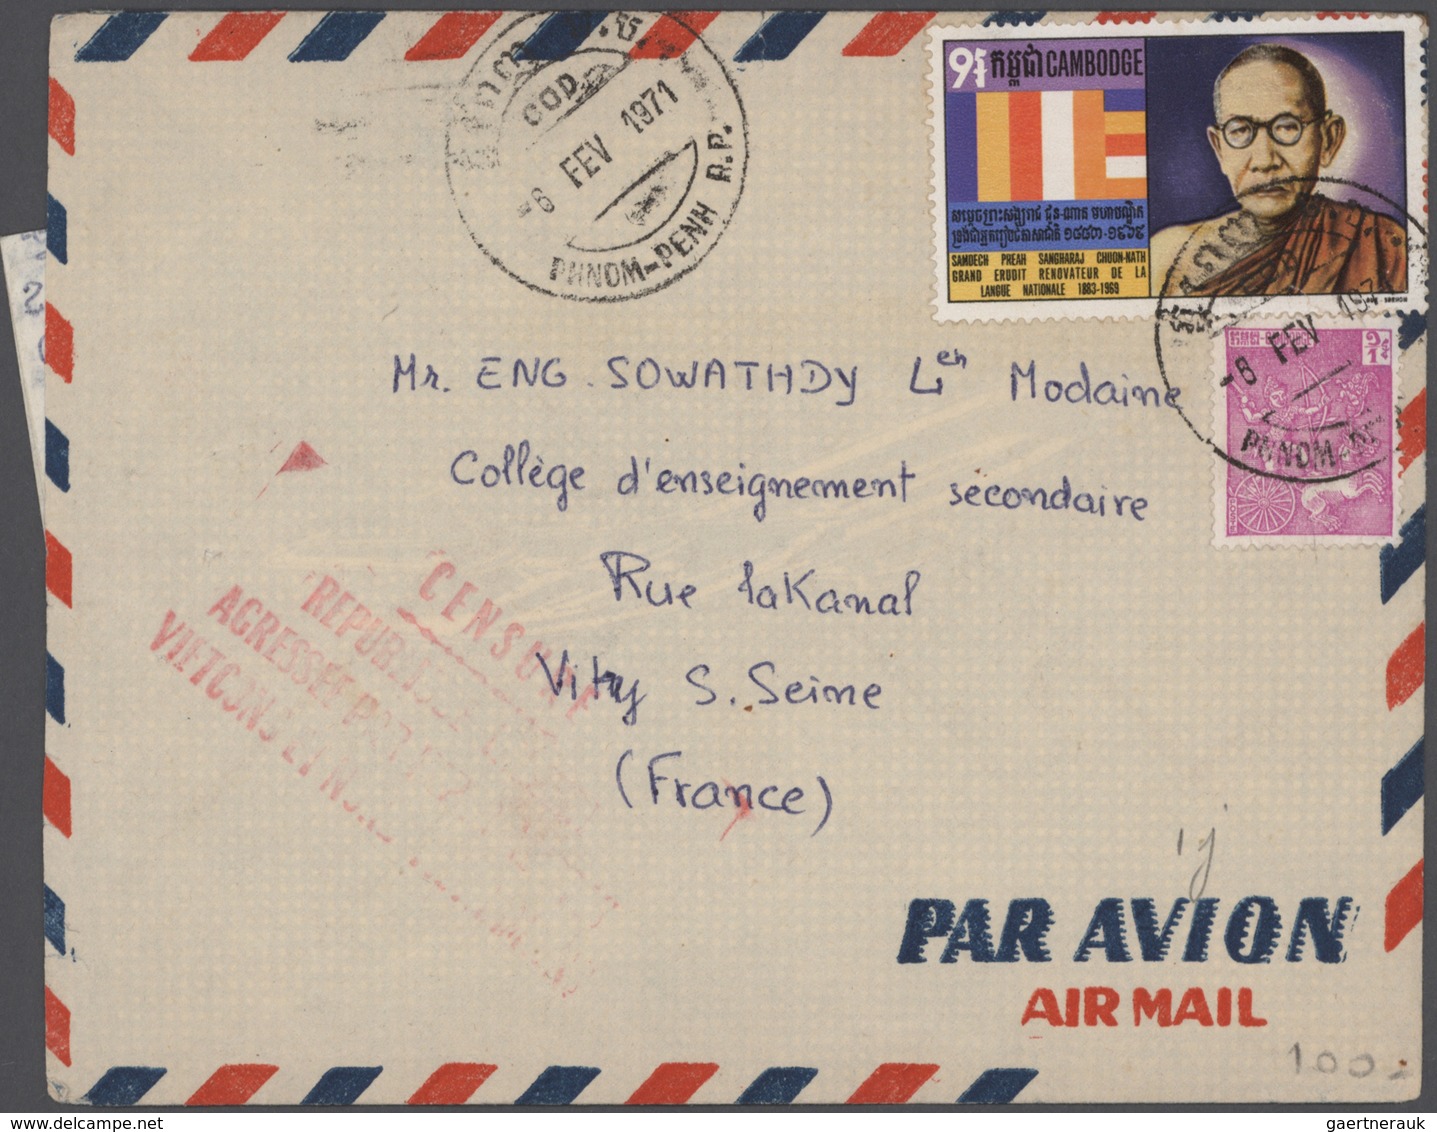 Kambodscha: 1971/89, Covers (11 Inc. One Inbound 1978 From US W. "service Temporarily Suspended" Aux - Cambodia